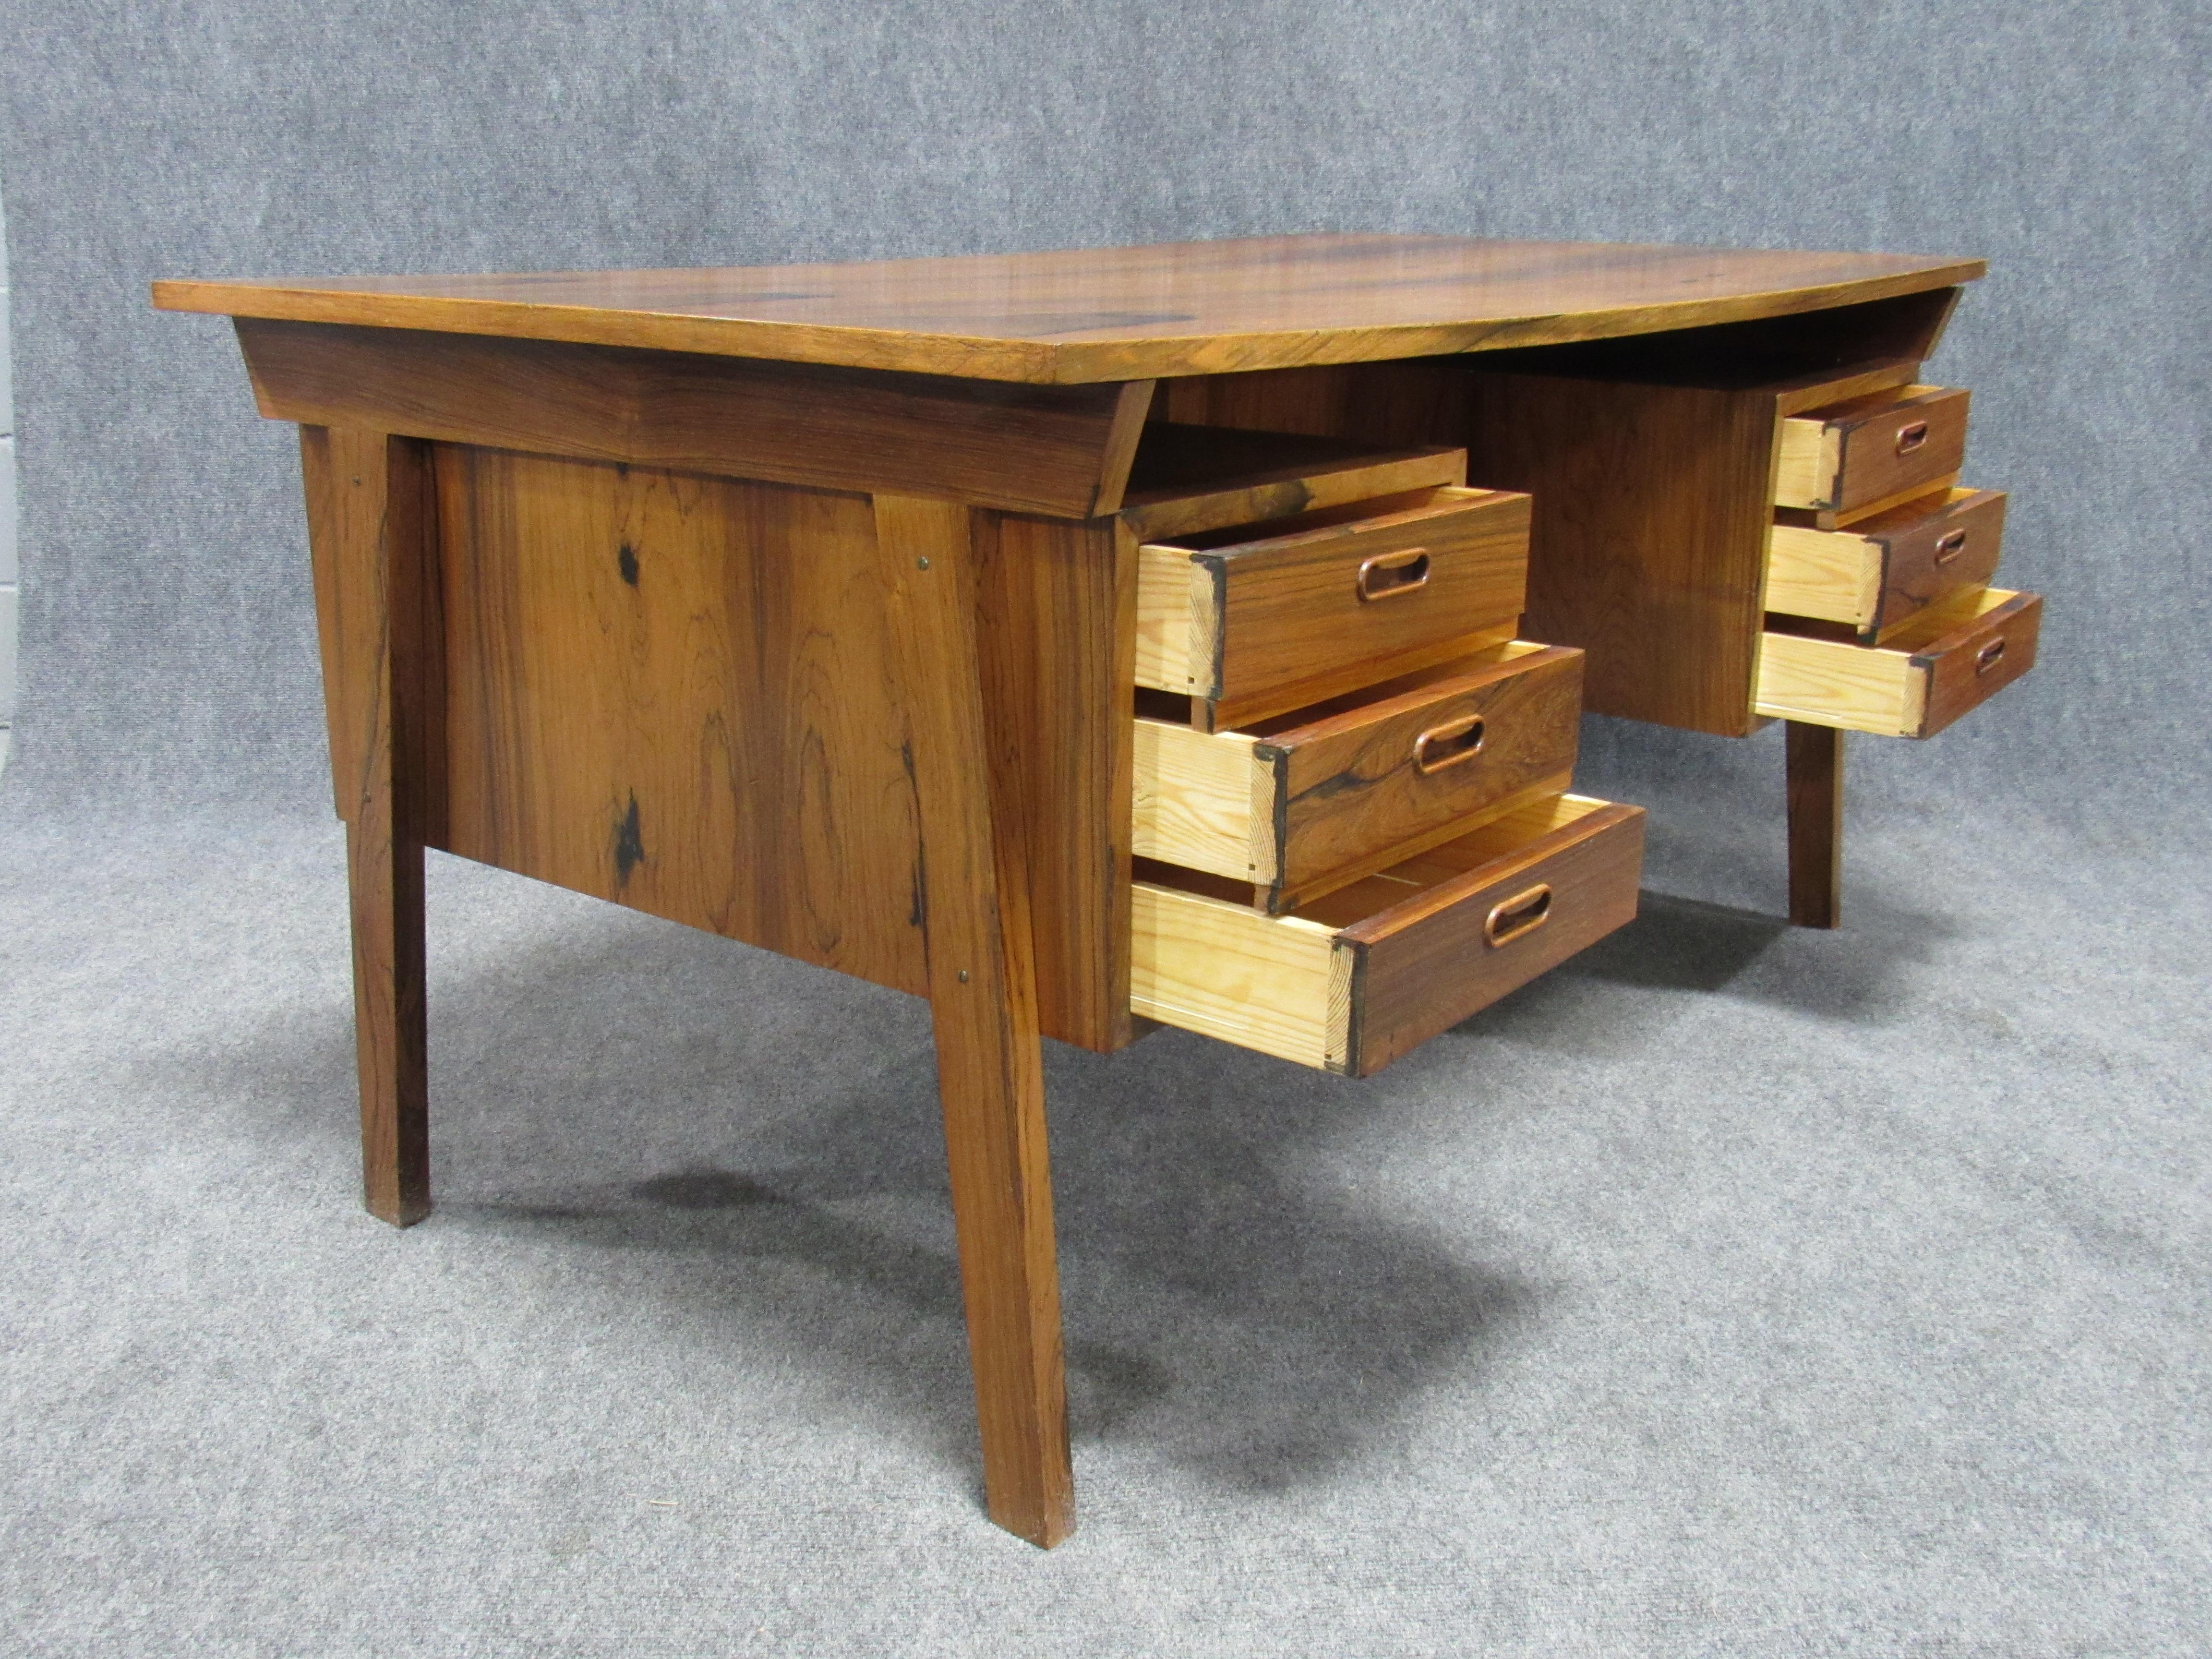 Midcentury Danish modern desk crafted in strikingly beautiful figured rosewood. Exquisitely crafted piece that will be the center piece of any home office, den or workplace. Piece in excellent vintage condition.